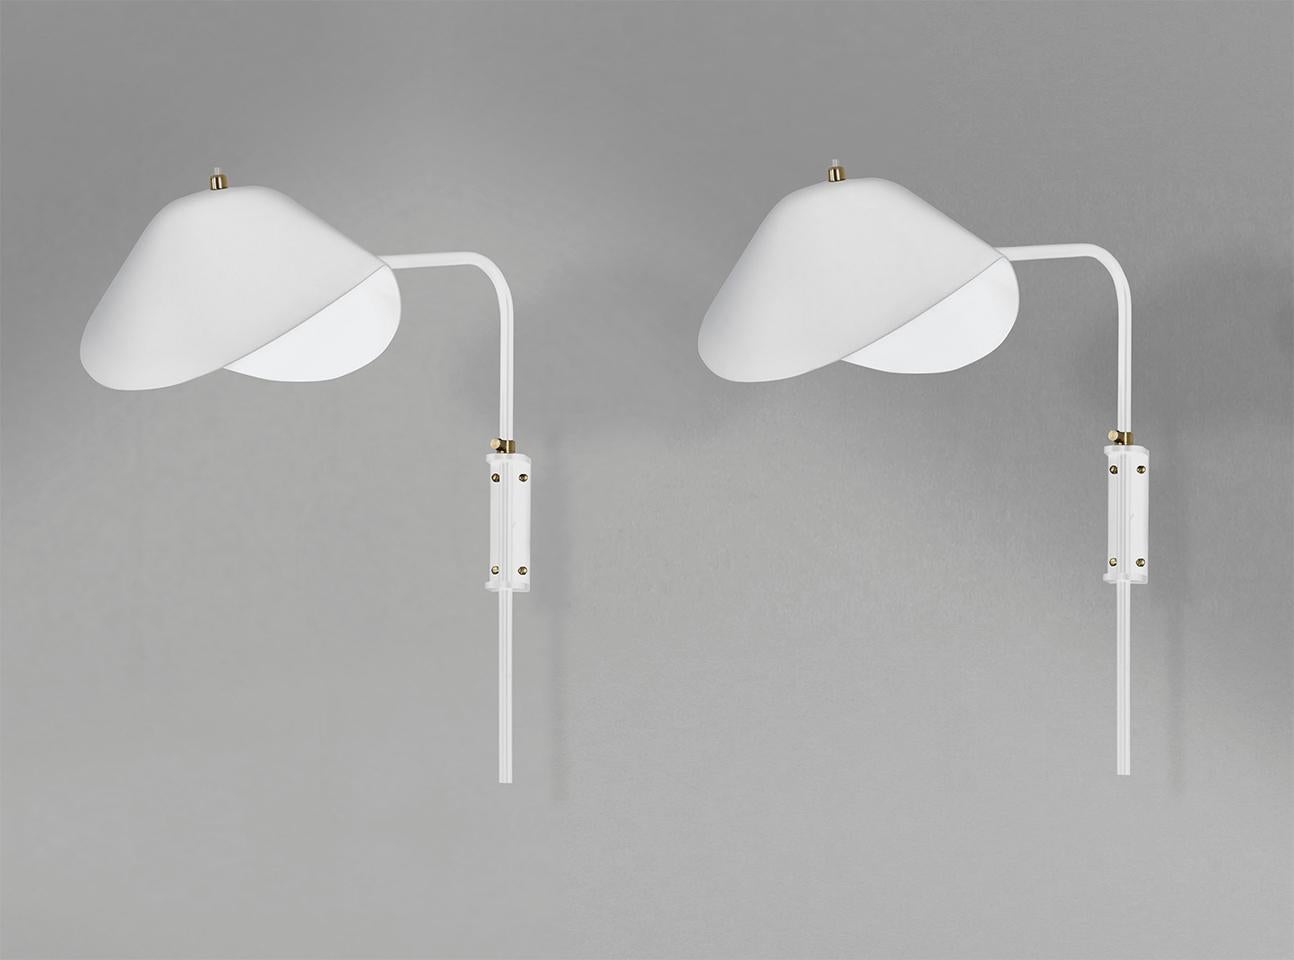 French Serge Mouille Mid-Century Modern White Anthony Wall Lamp Whit Fixing Bracket Set For Sale